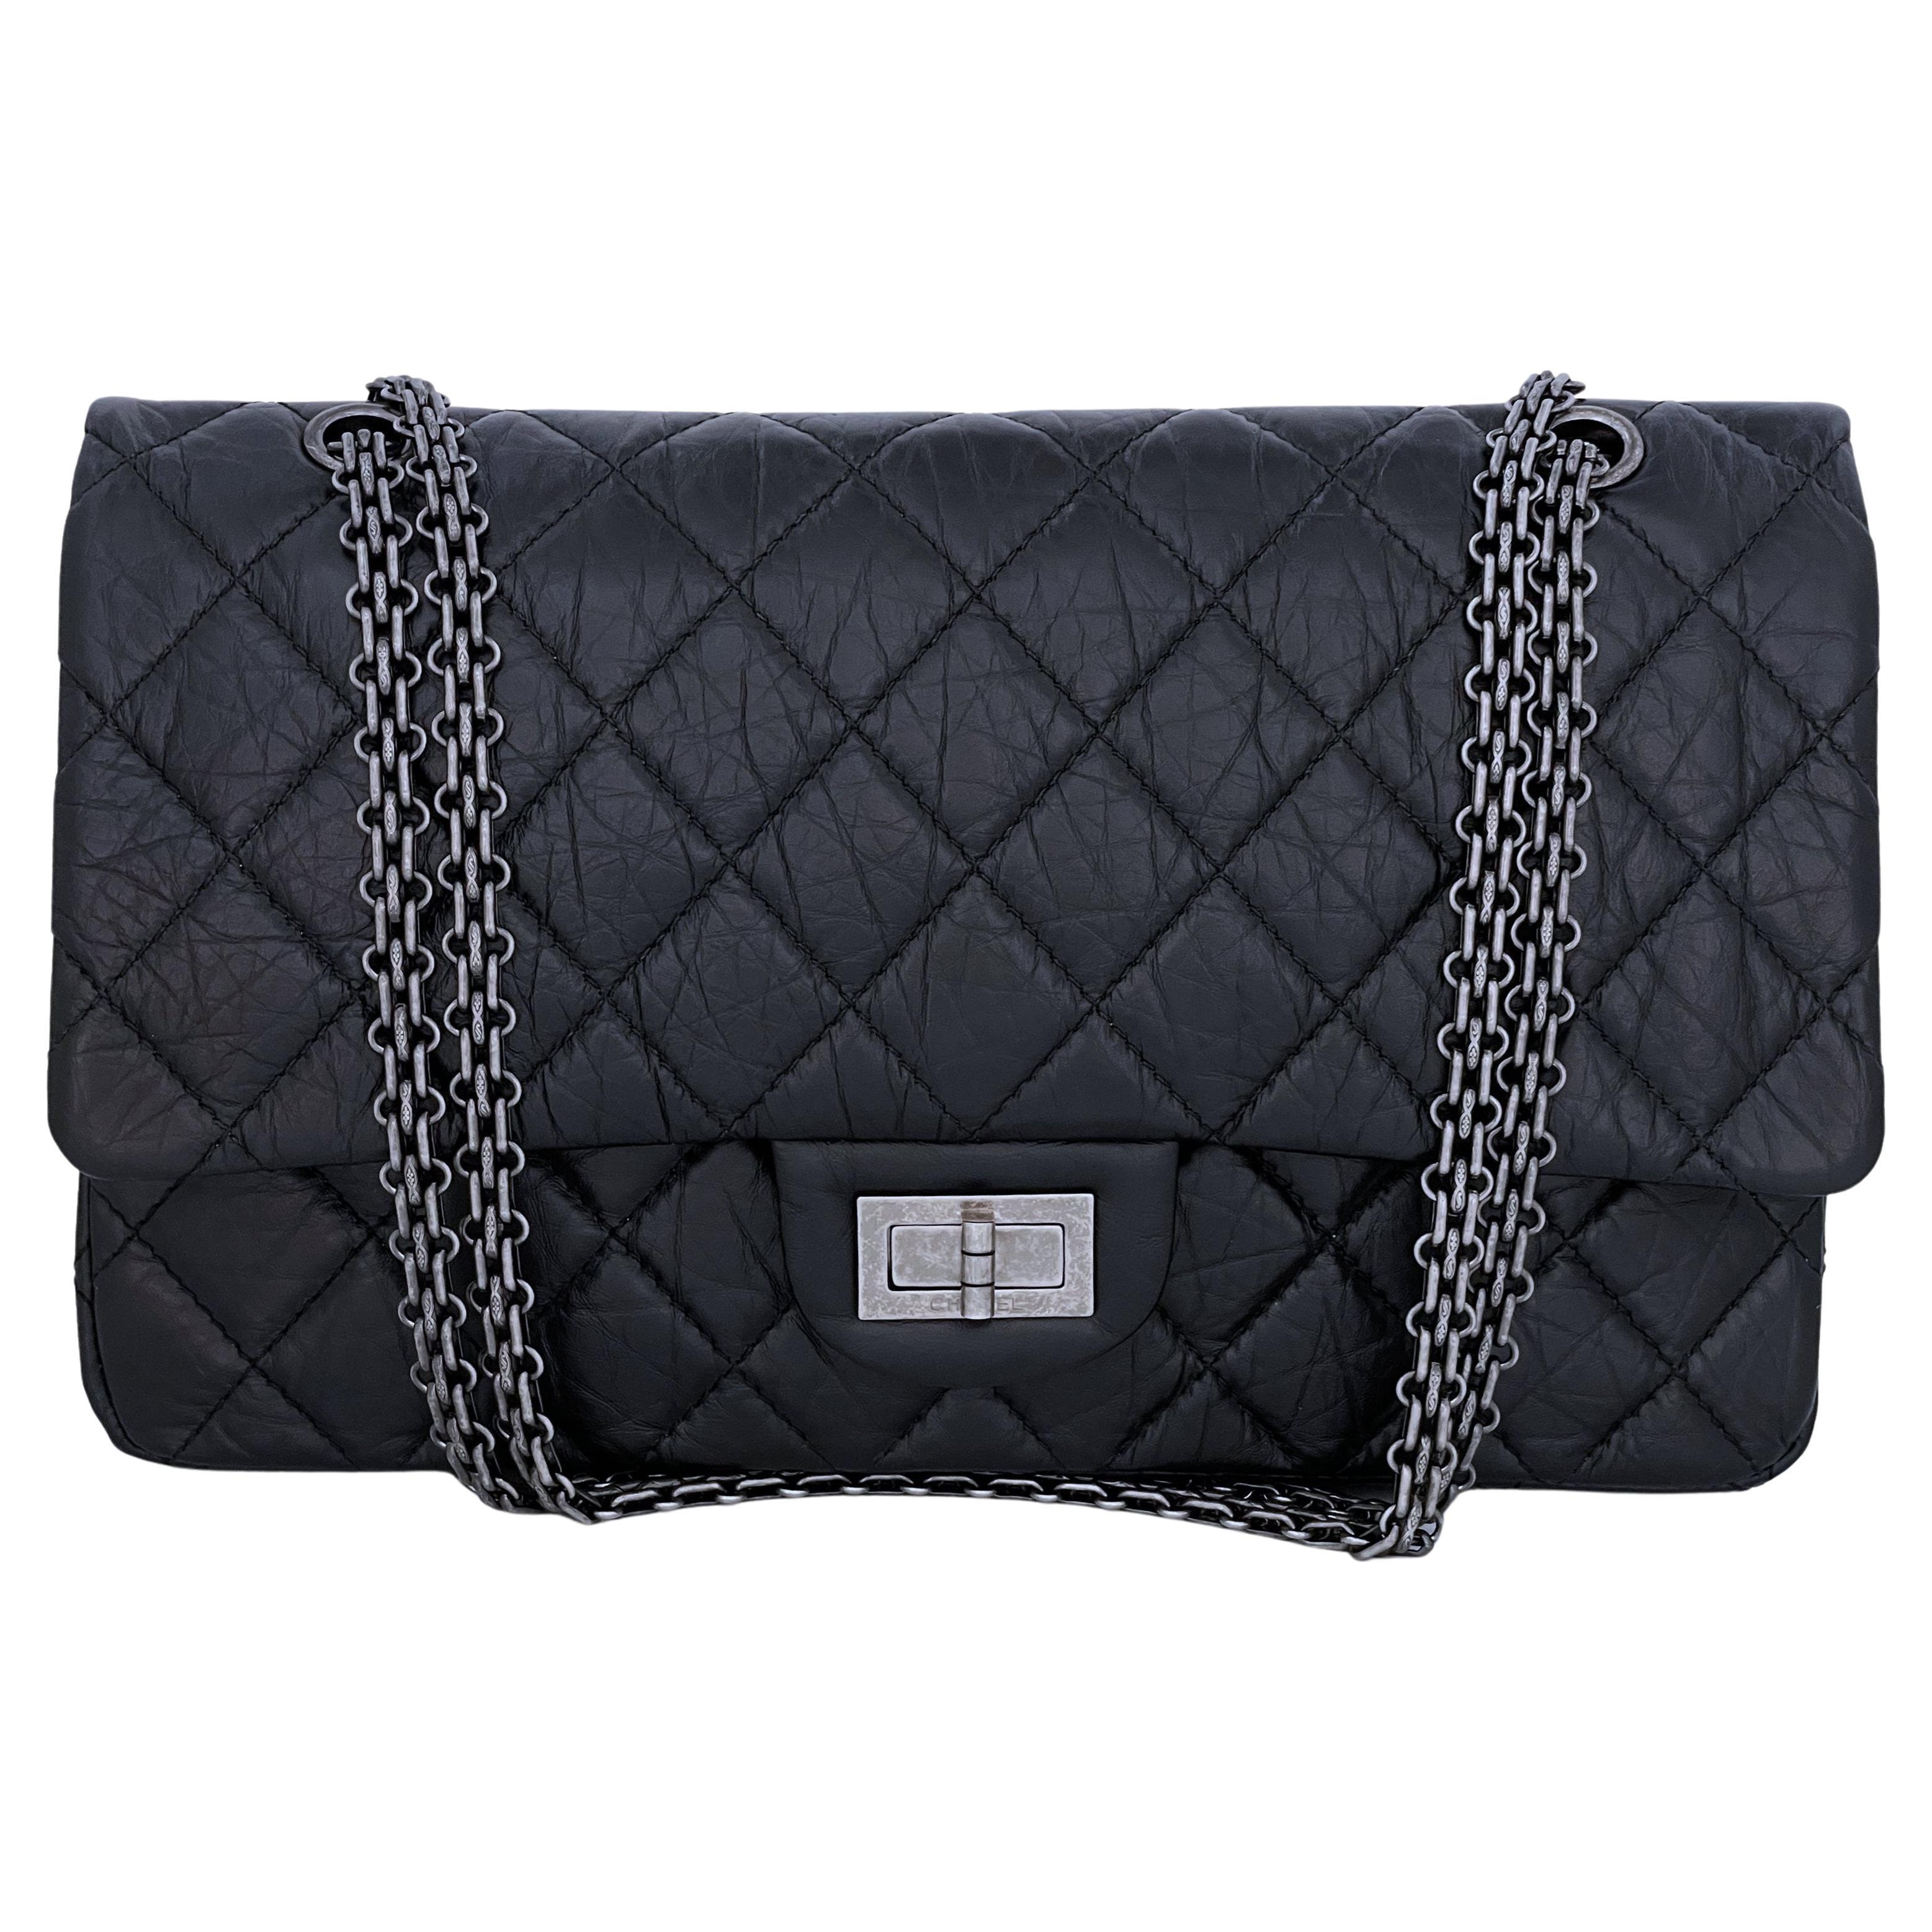 Pristine Chanel Black Aged Calfskin 2.55 Reissue 227 Double Flap Bag RHW 64730 For Sale